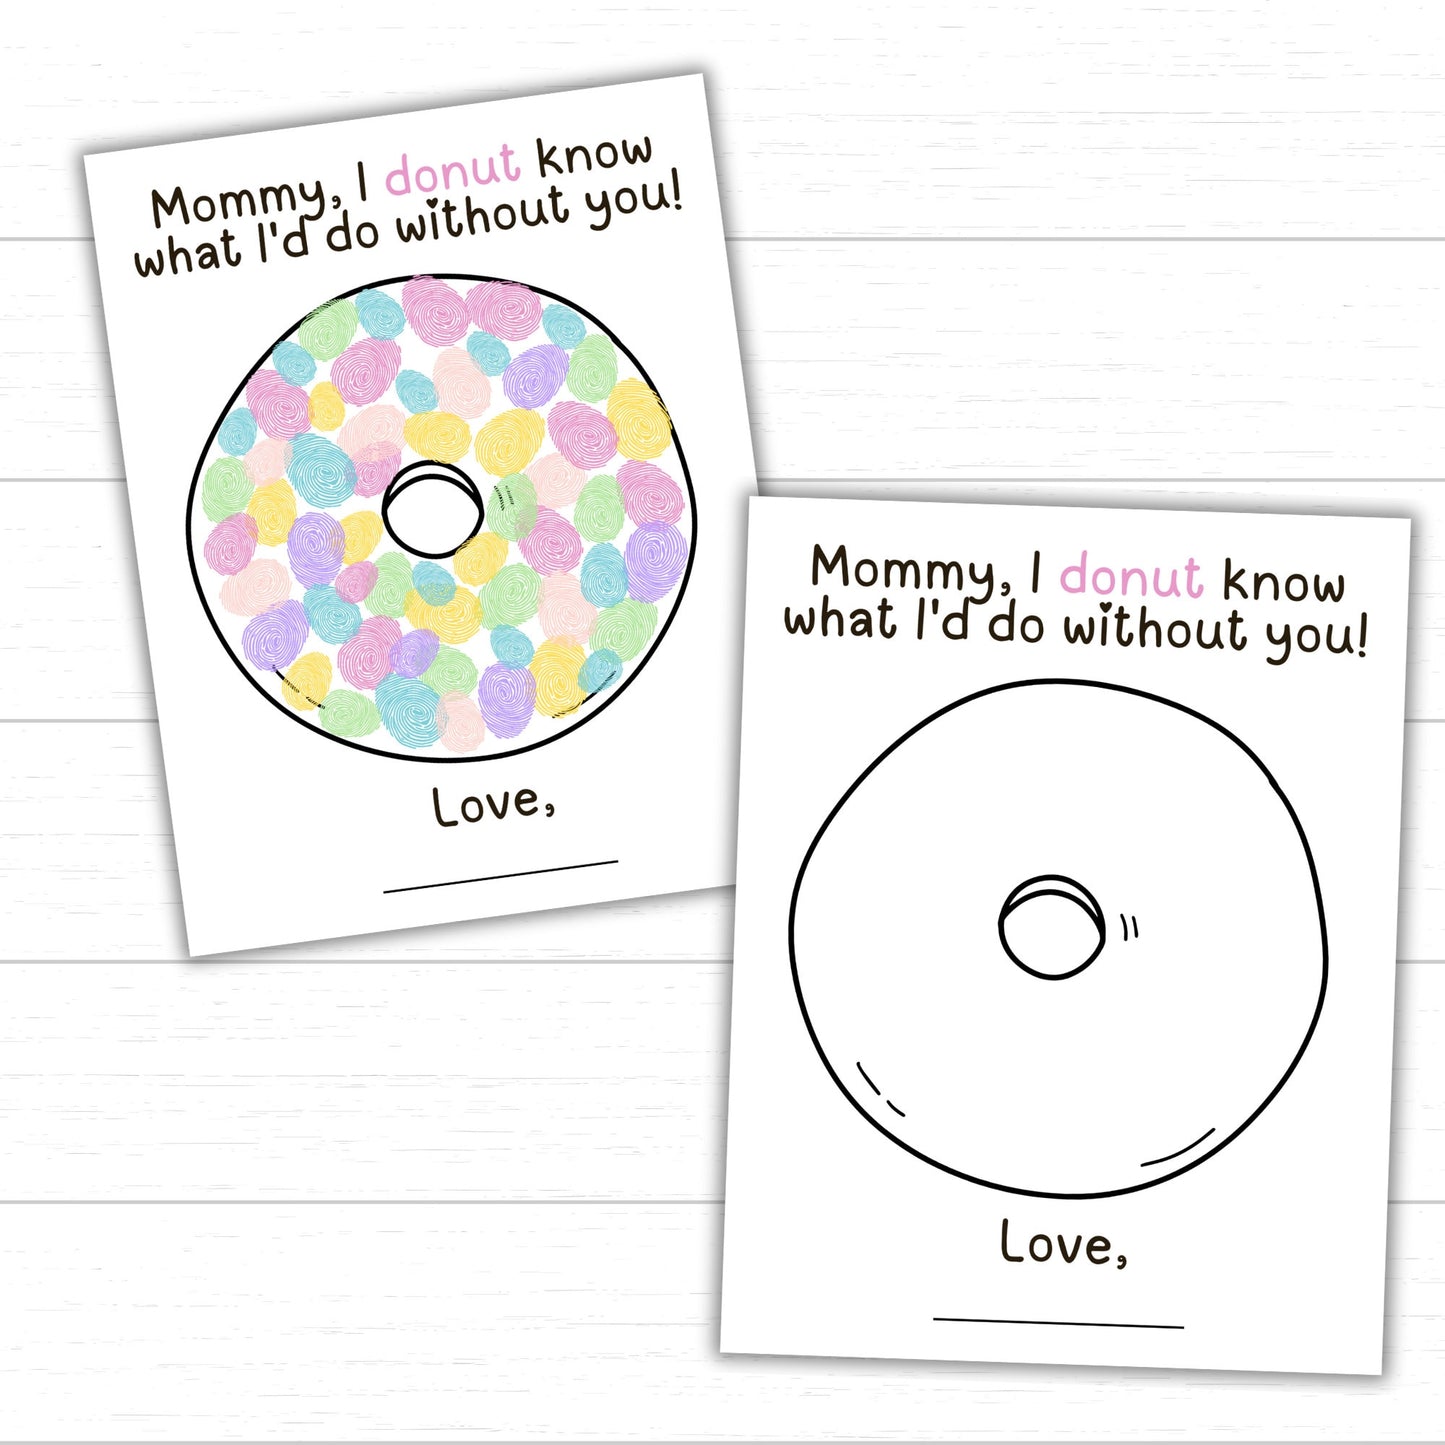 Mother's Day Donut Fingerprint Art, I Donut Know What I'd Do Without You, Mother's Day Craft, Mother's Day Gift Idea, Mother's Day Keepsake